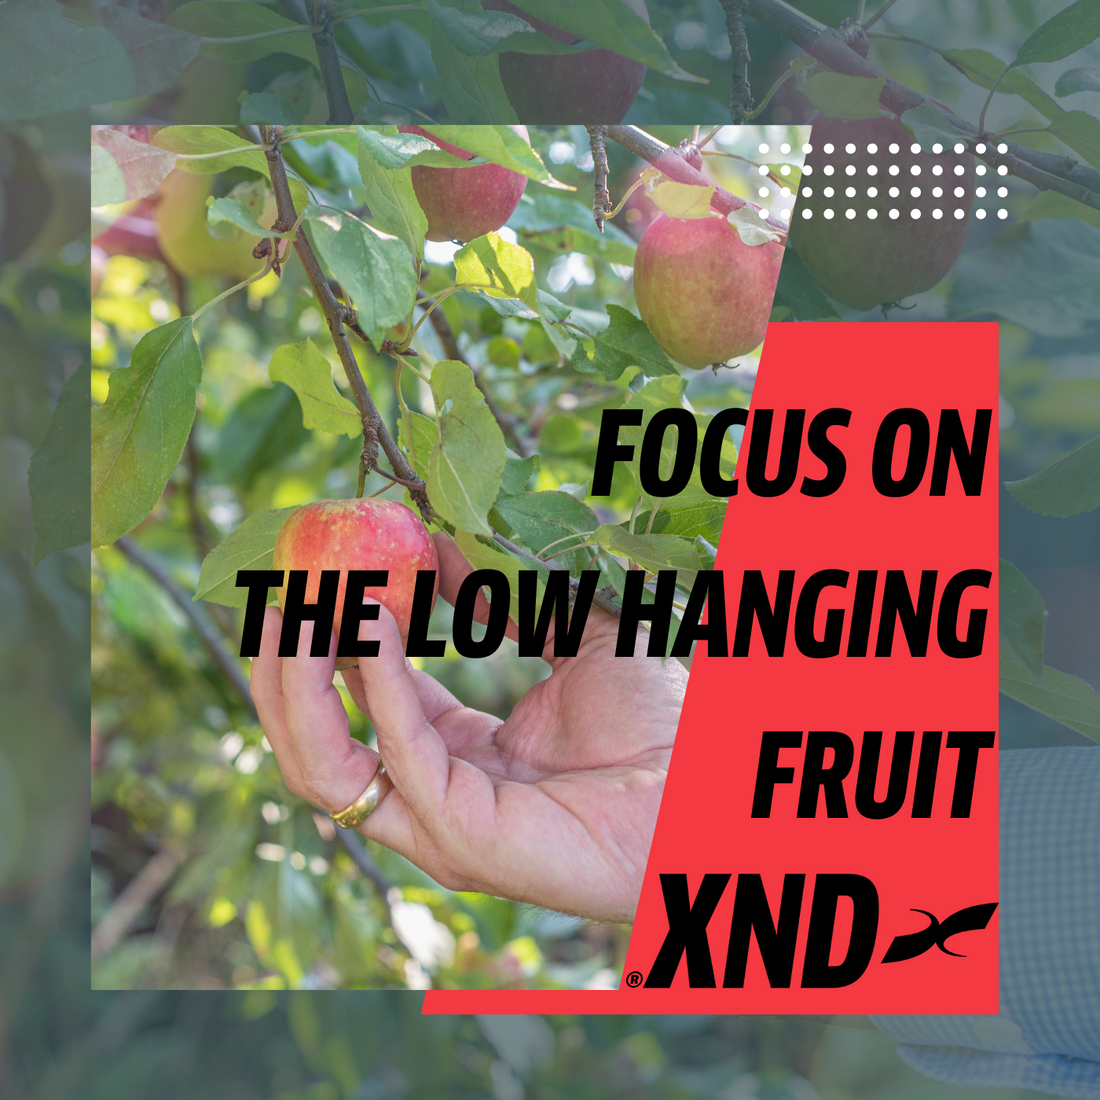 Focus on the low hanging fruit